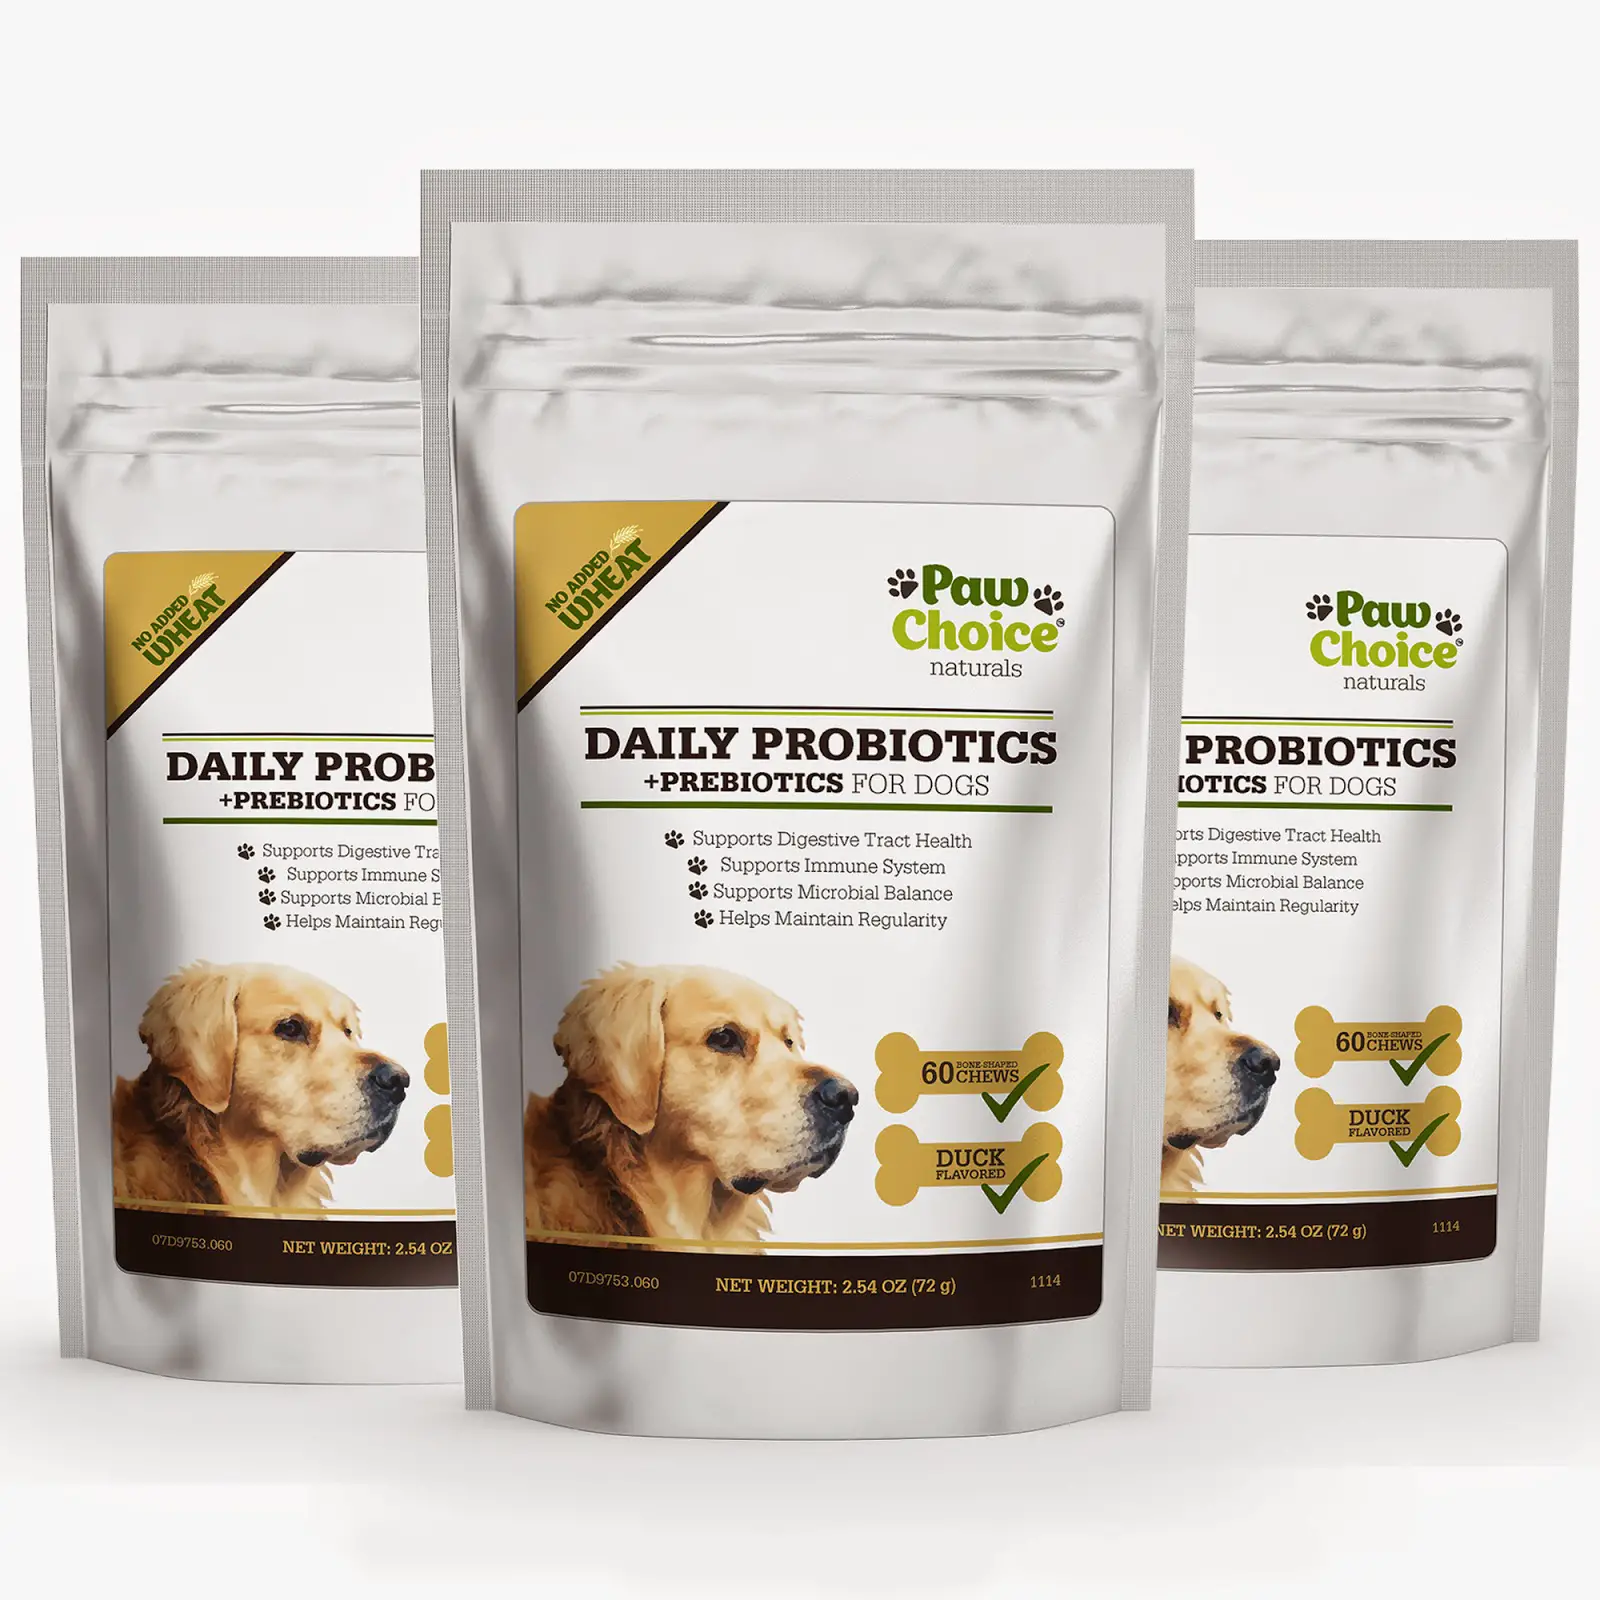 Probiotic Chews for Dogs with Prebiotics Review #pawchoice